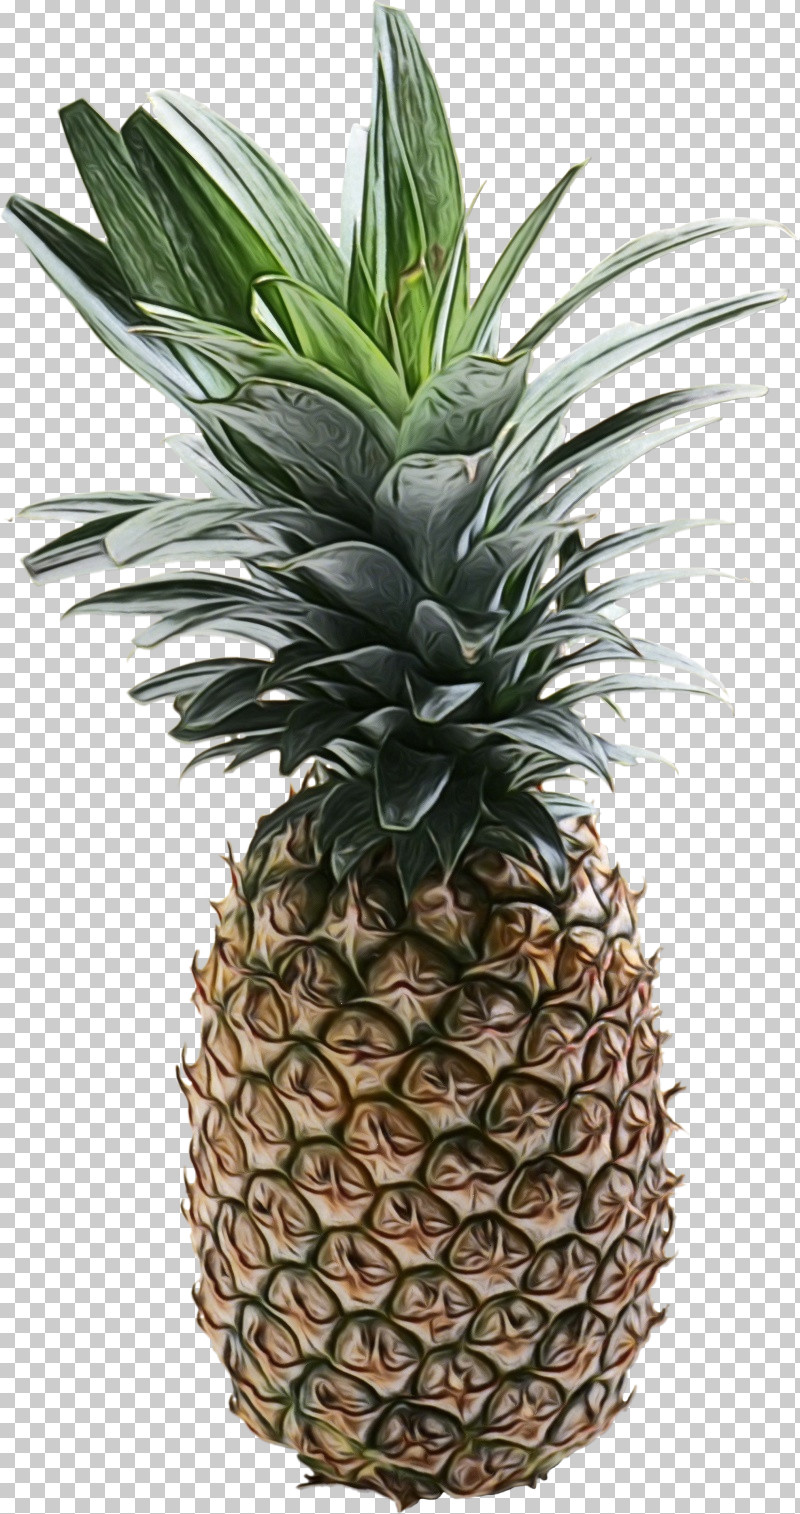 Pineapple PNG, Clipart, Biology, Flowerpot, Fruit, Paint, Pineapple Free PNG Download